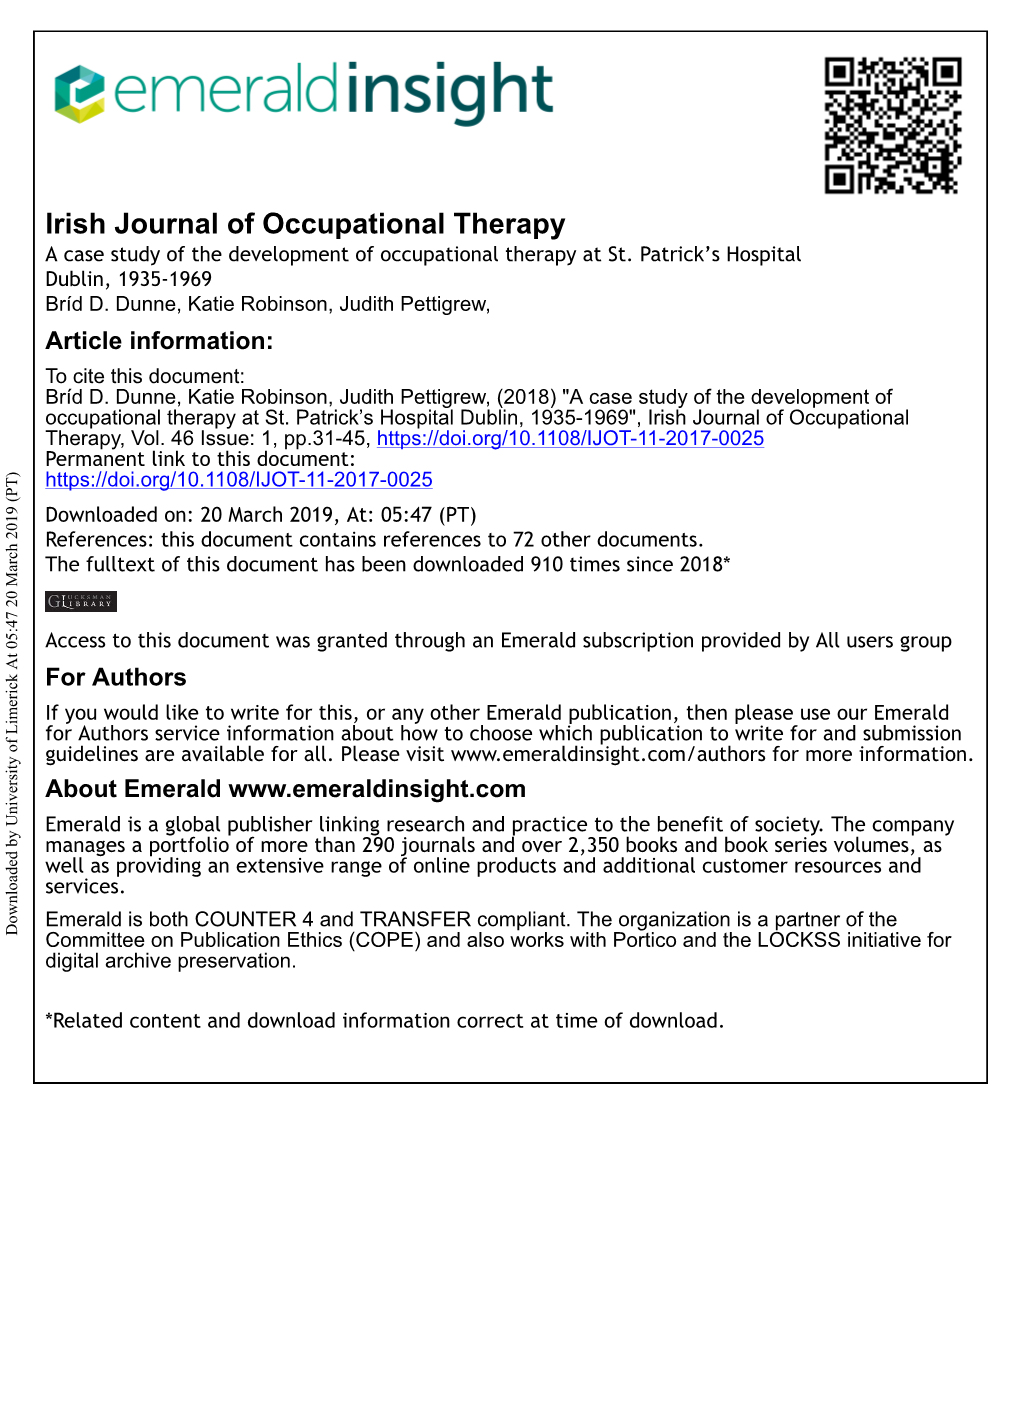 A Case Study of the Development of Occupational Therapy at St. Patrick's